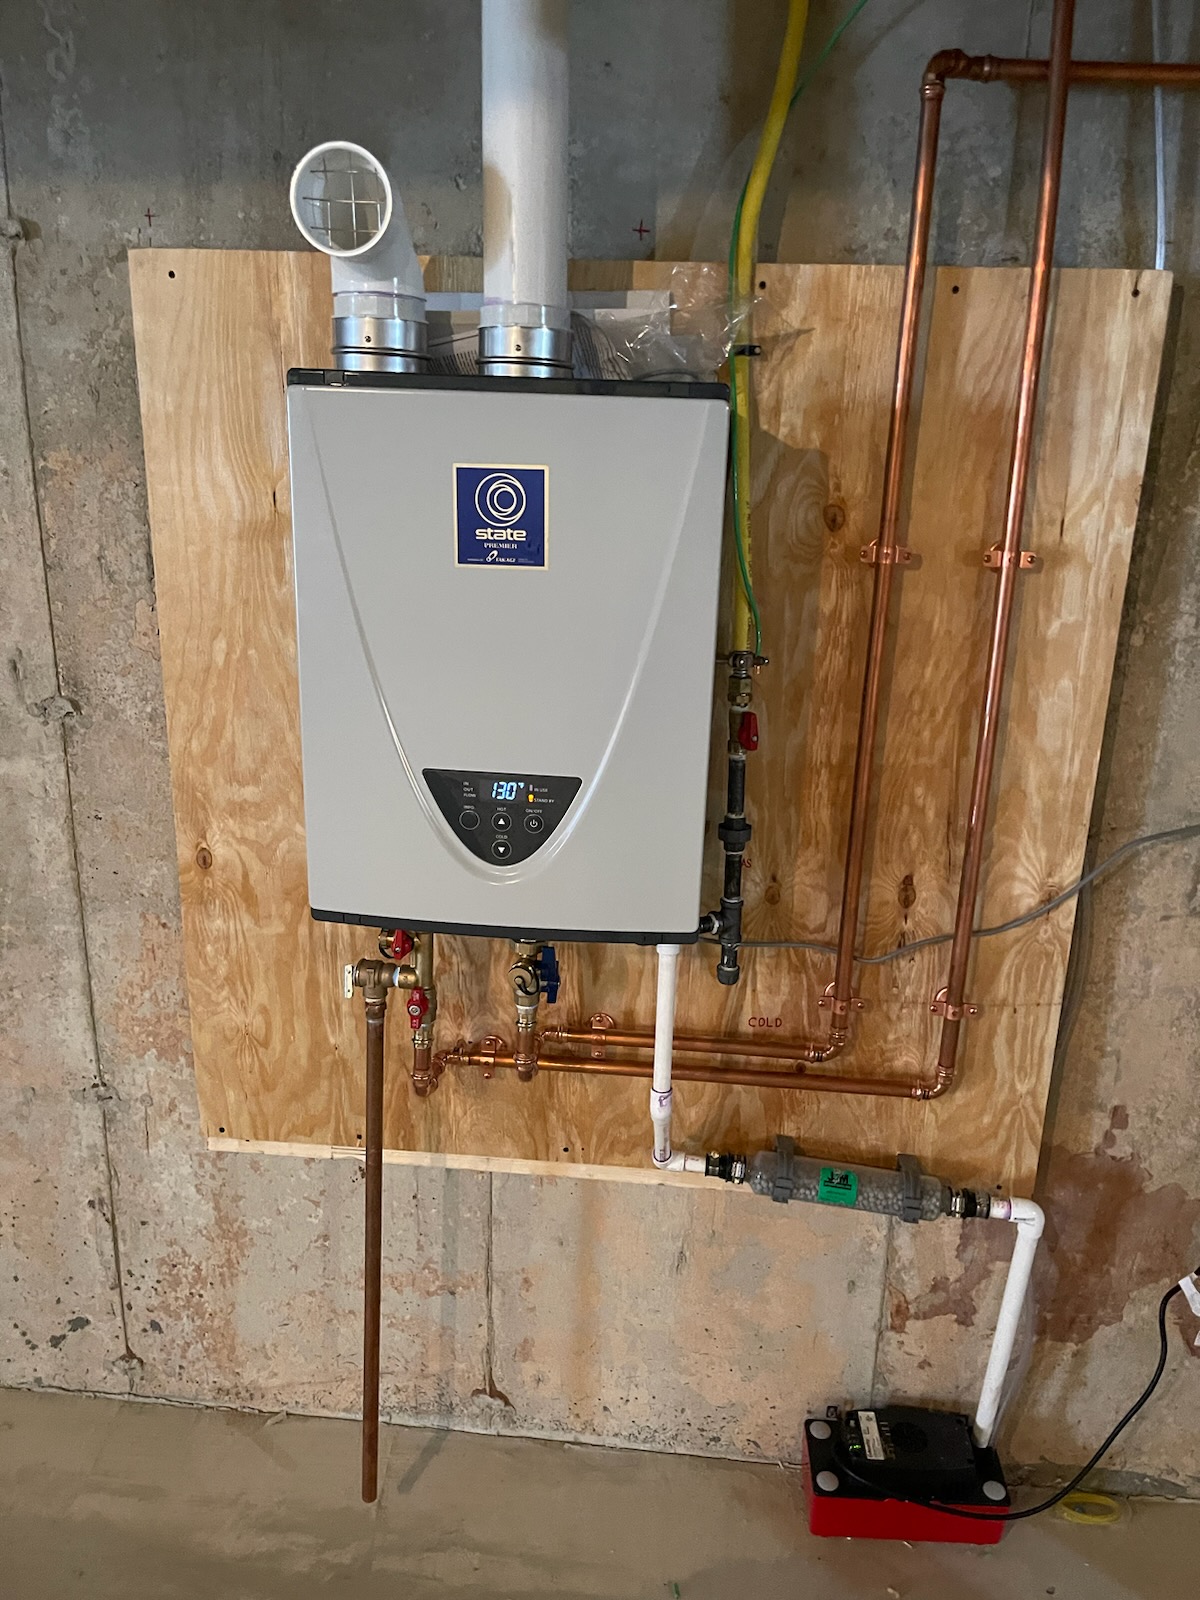 Tankless Water Heater Installation done by Service Relief technician in Manchester, TX